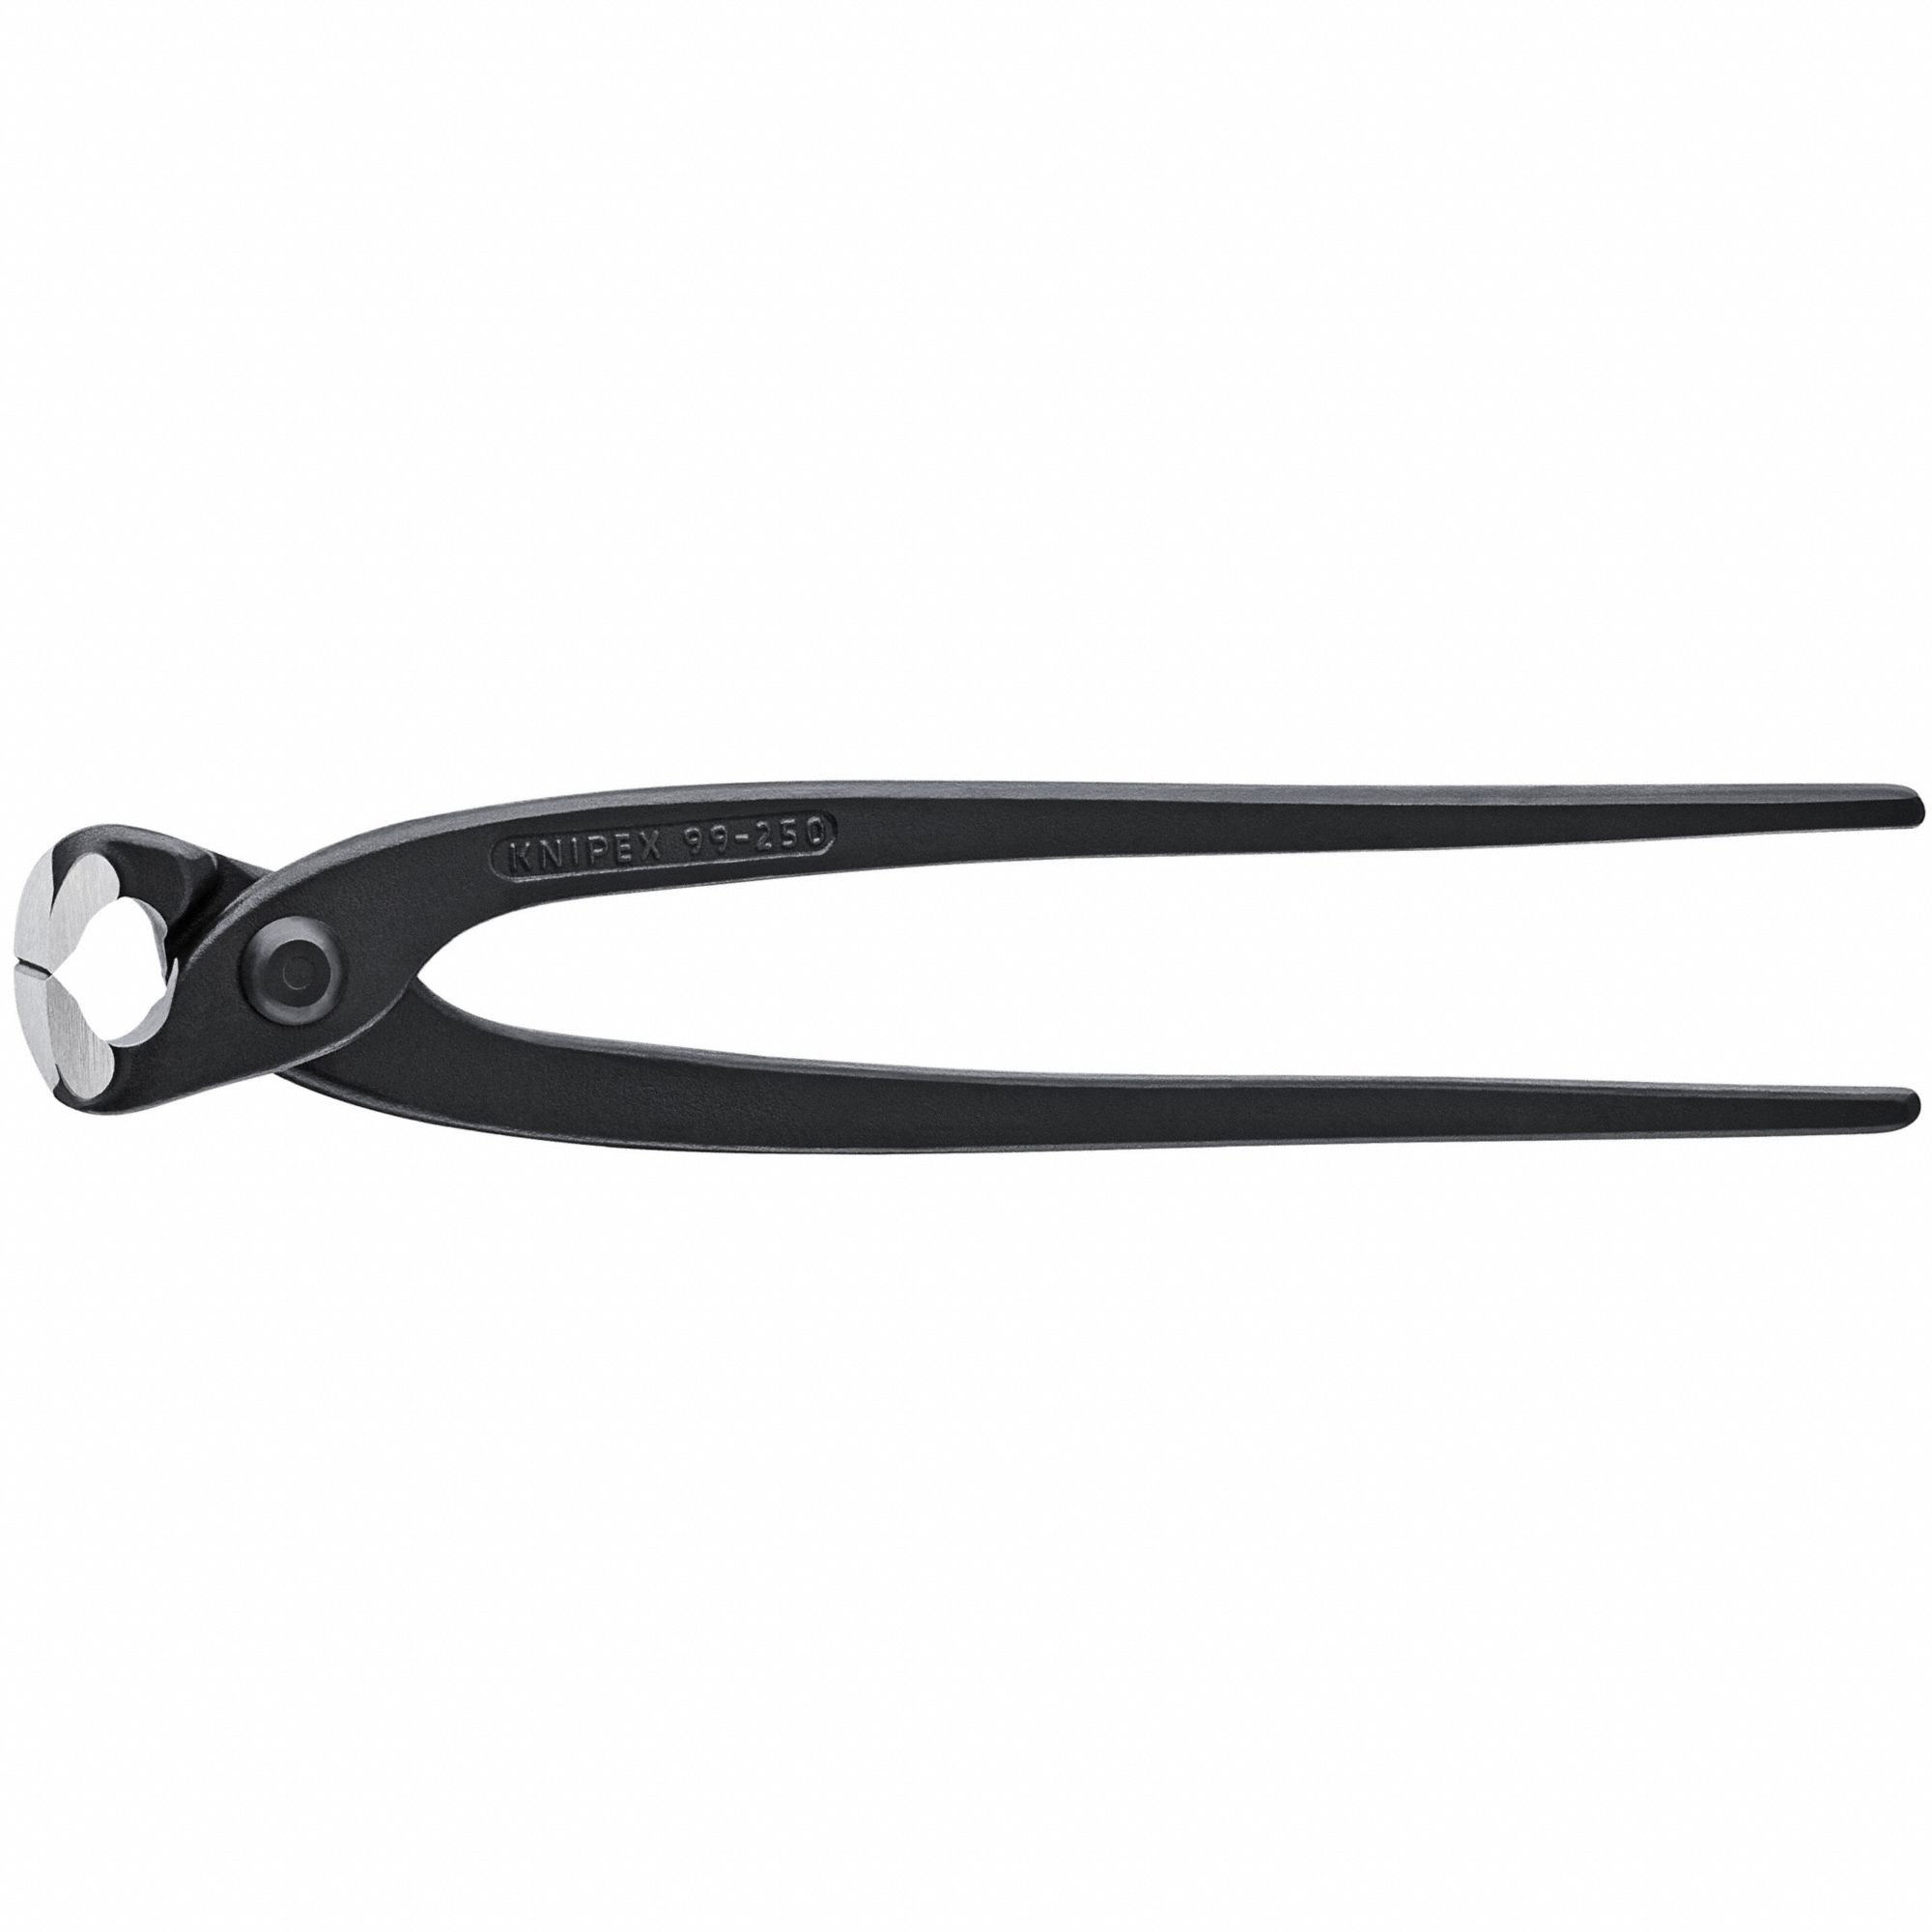 End Cutting Nippers: 9 3/4 in Overall Lg, For 0.09 in Max Wire Thick, Steel, Steel